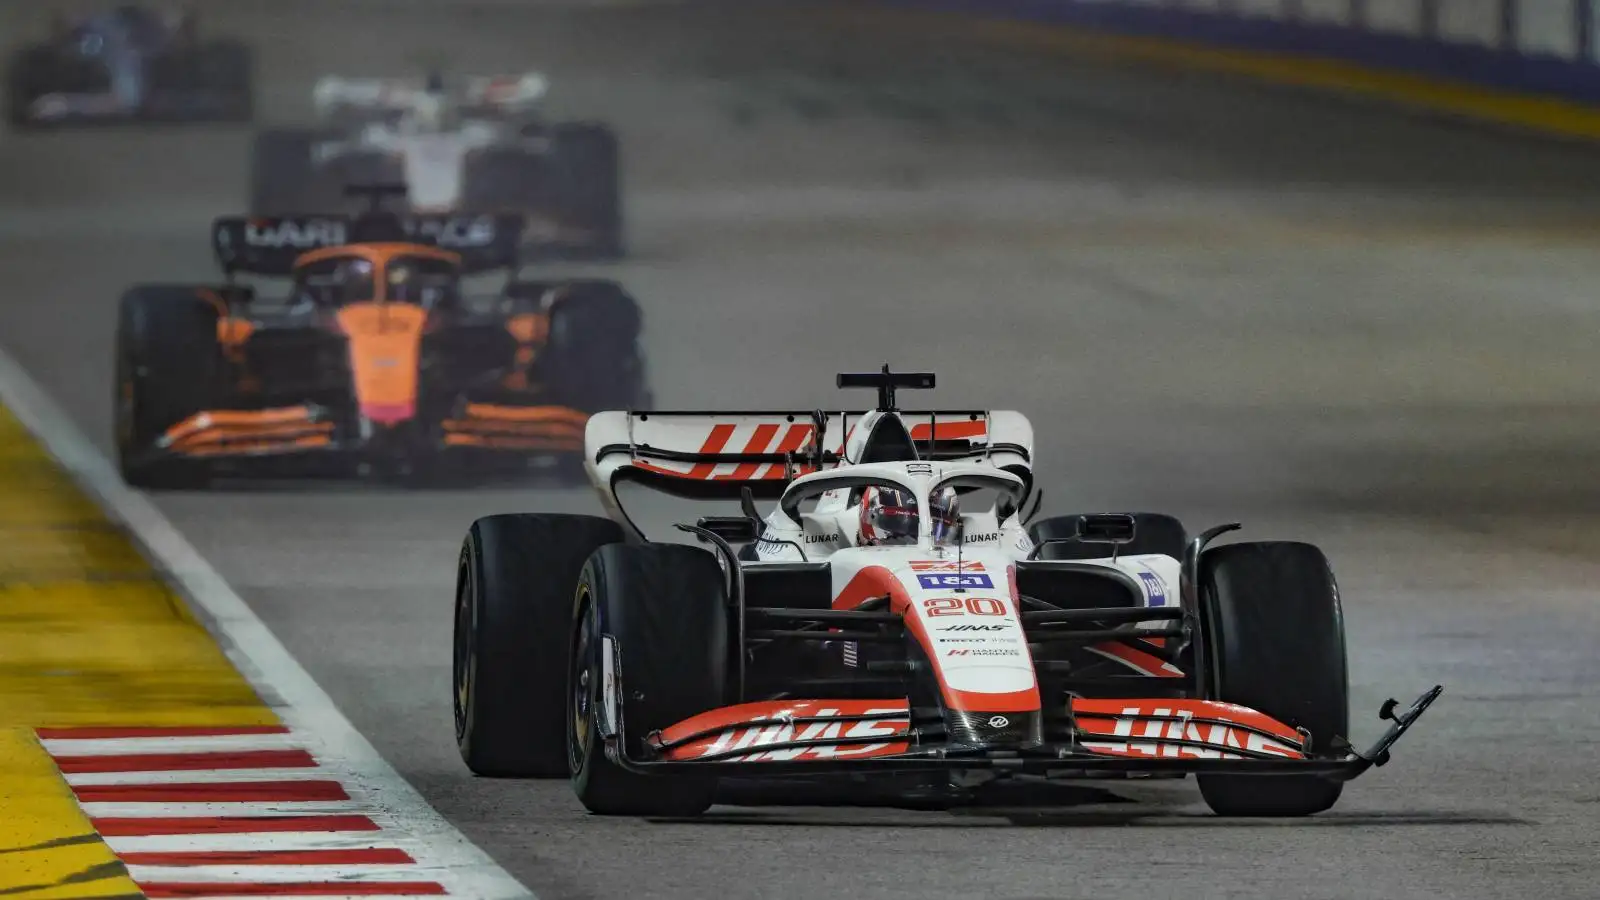 Kevin Magnussen in action for Haas. Singapore, October 2022.